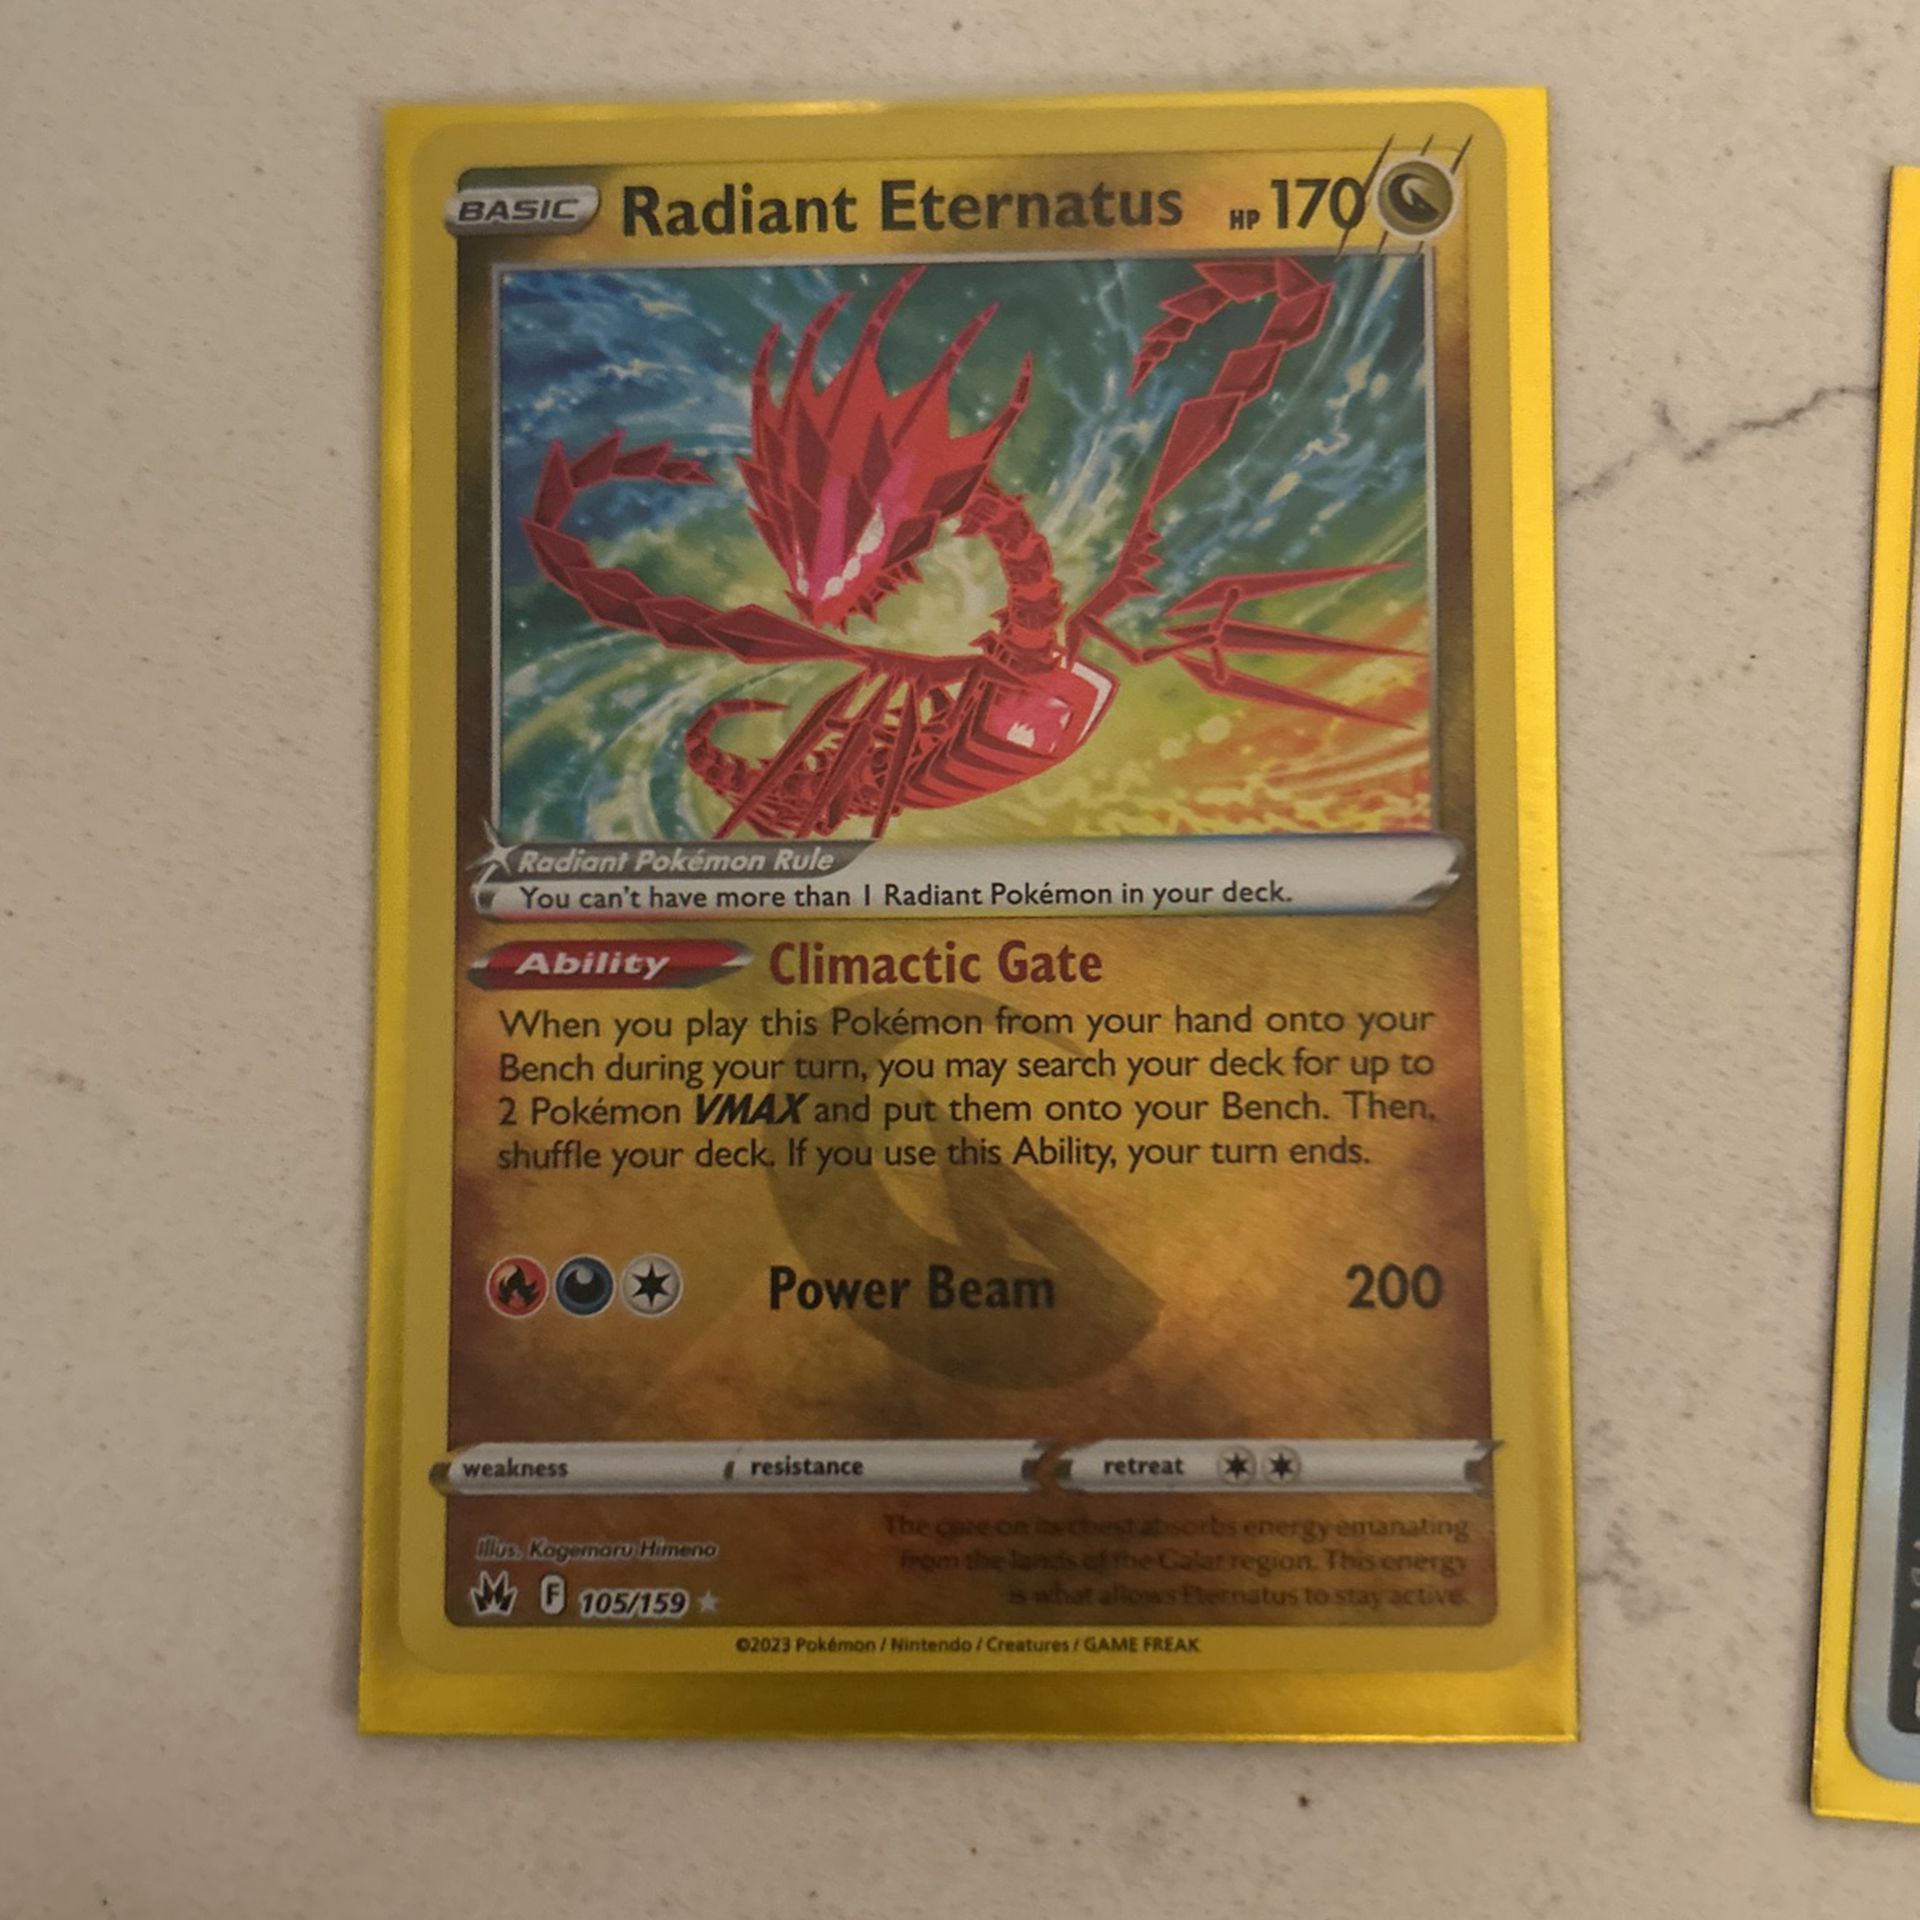 Radiant Eternatus Pokémon Collectible, Sand And Offer. Nothing Free.